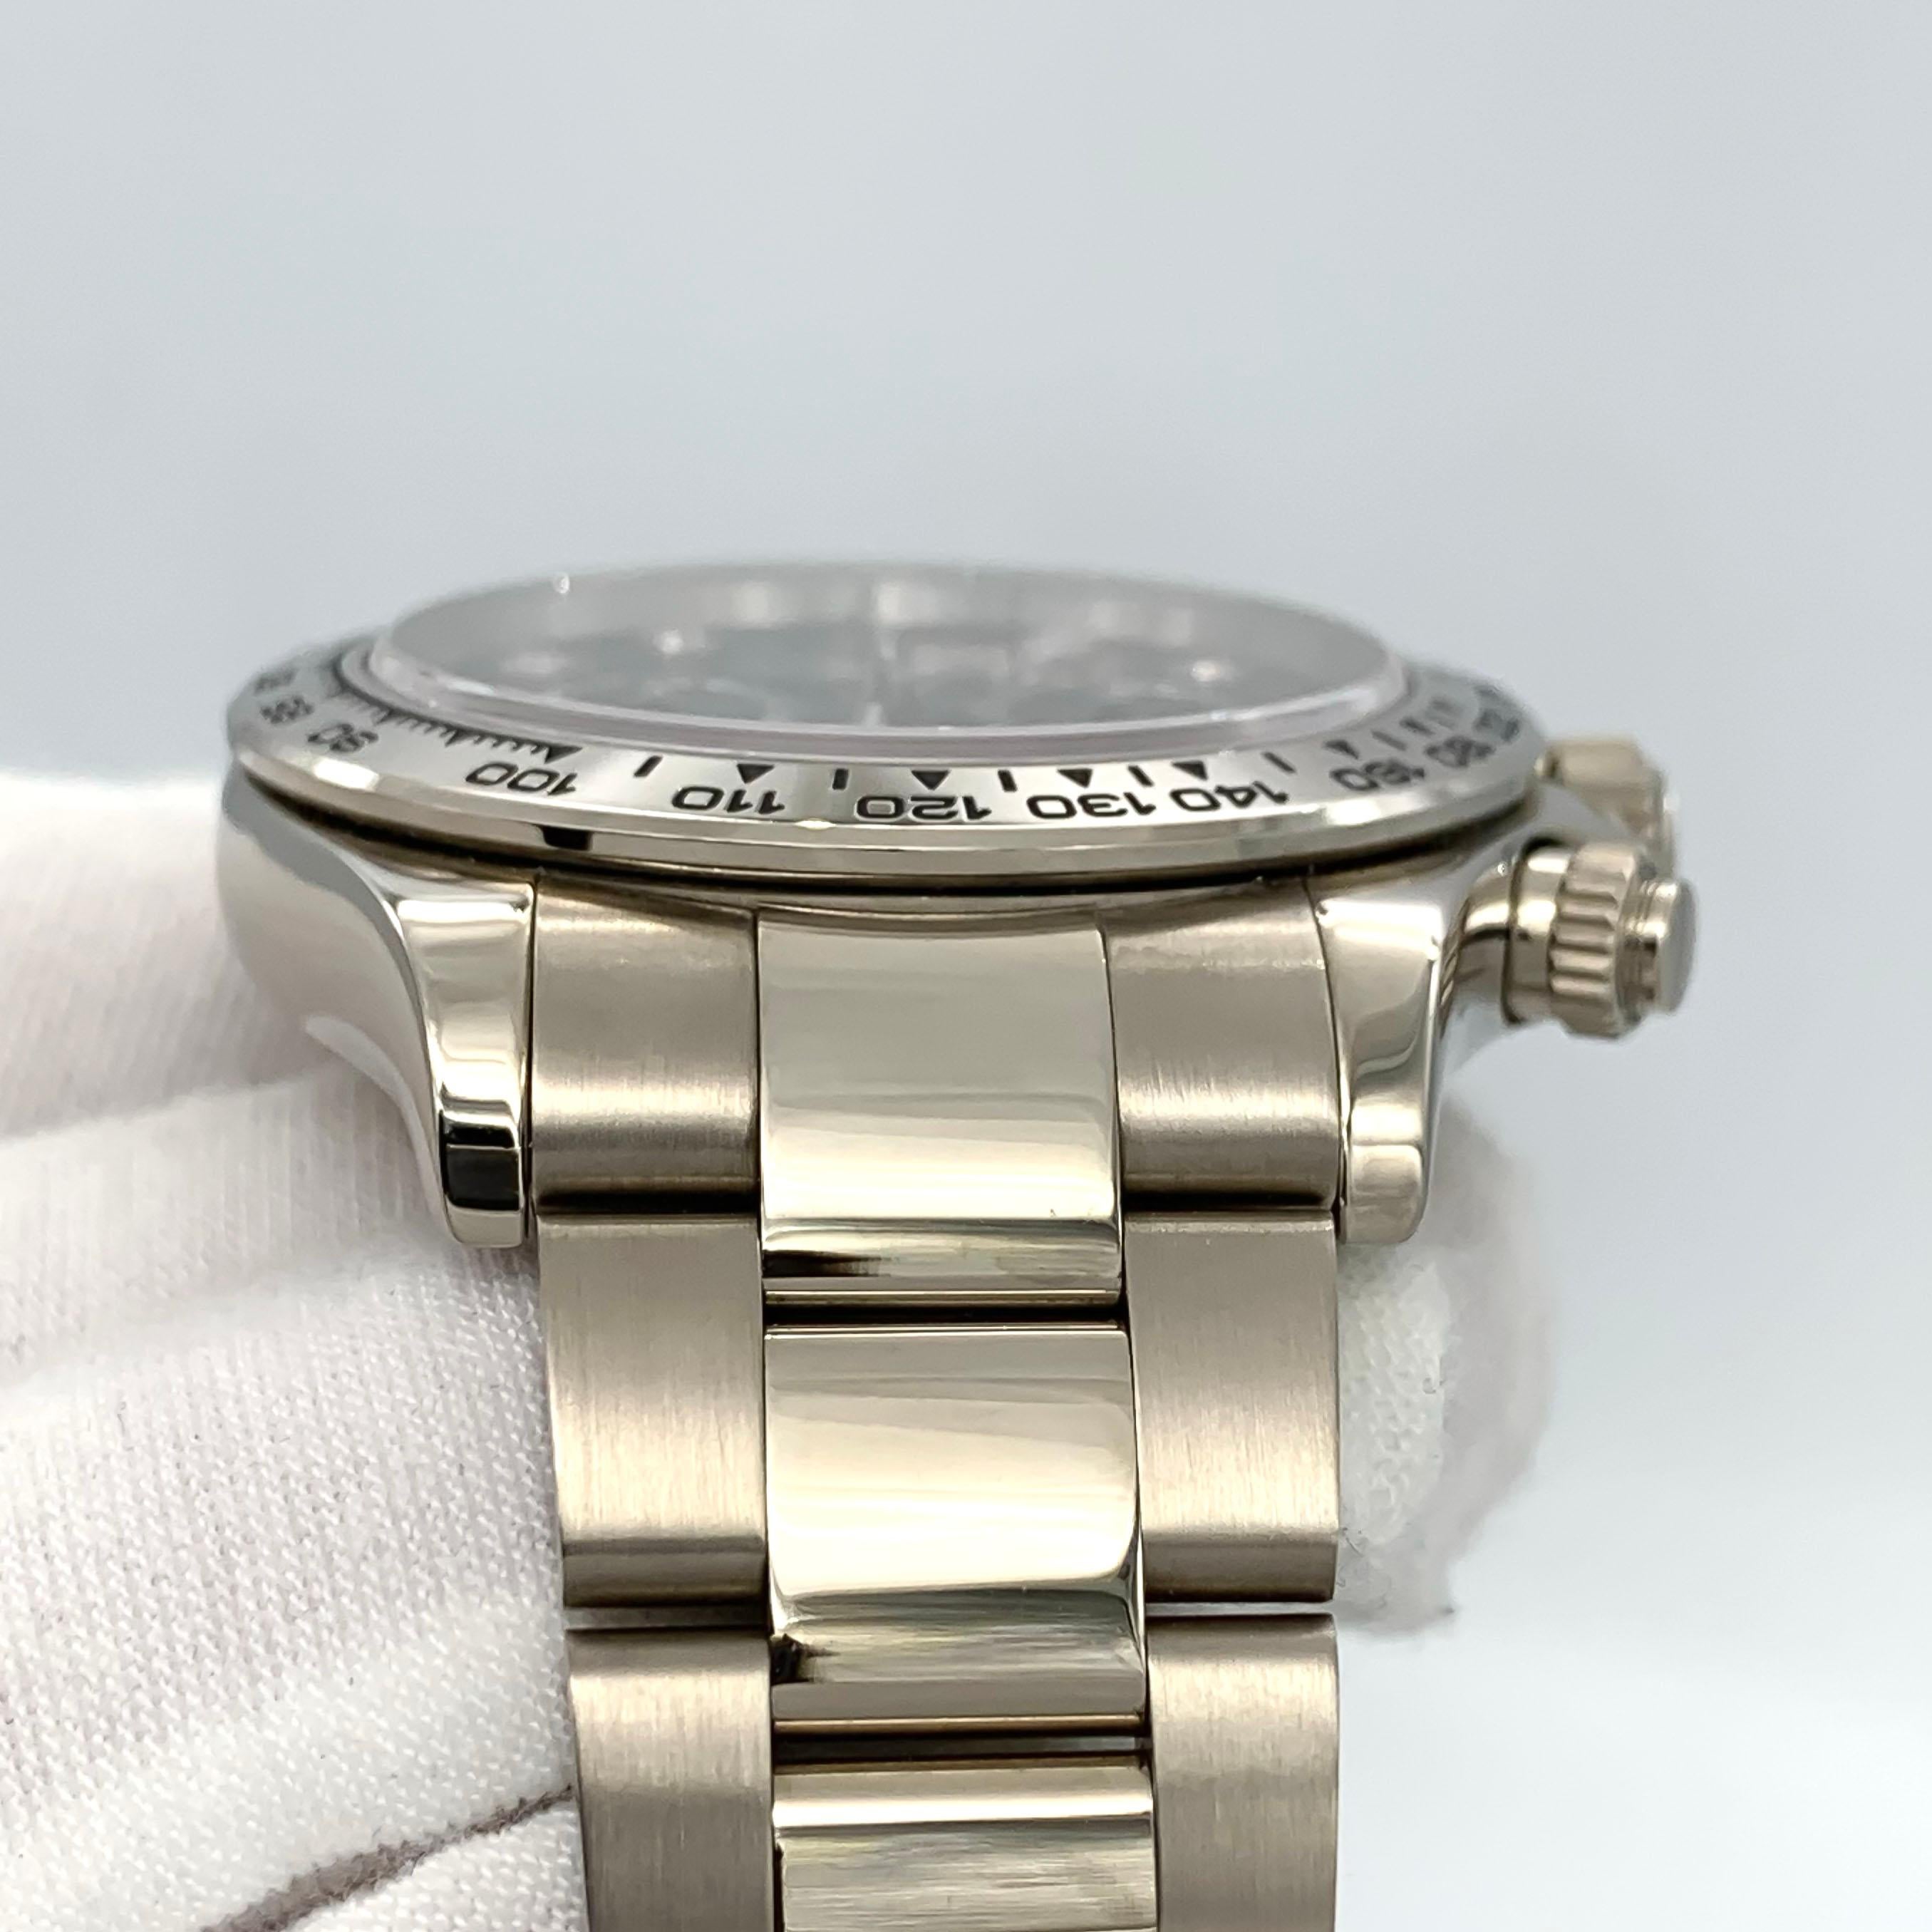 Rolex Daytona 116509, Black Diamond Dial  In Excellent Condition For Sale In New York, NY